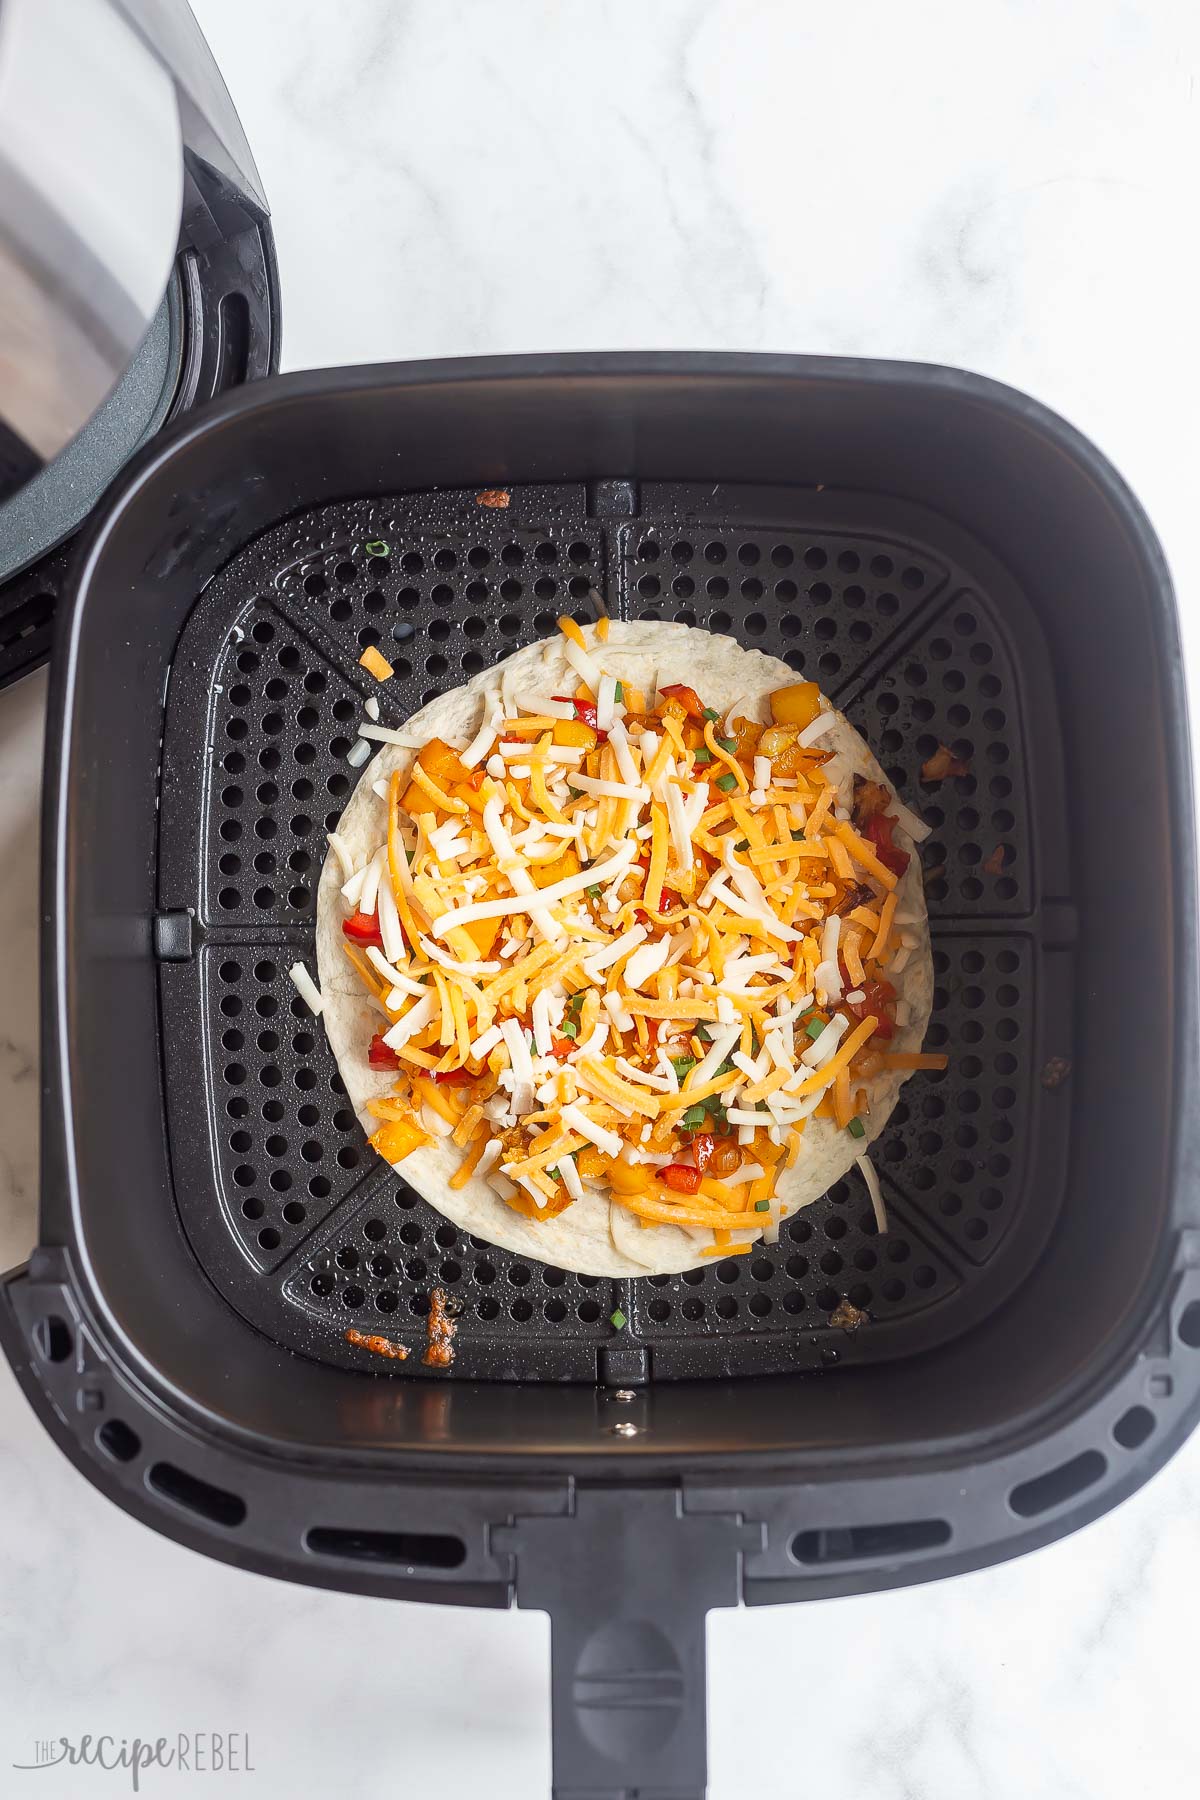 Top view of tortilla with toppings and shredded cheese in air fryer basket.